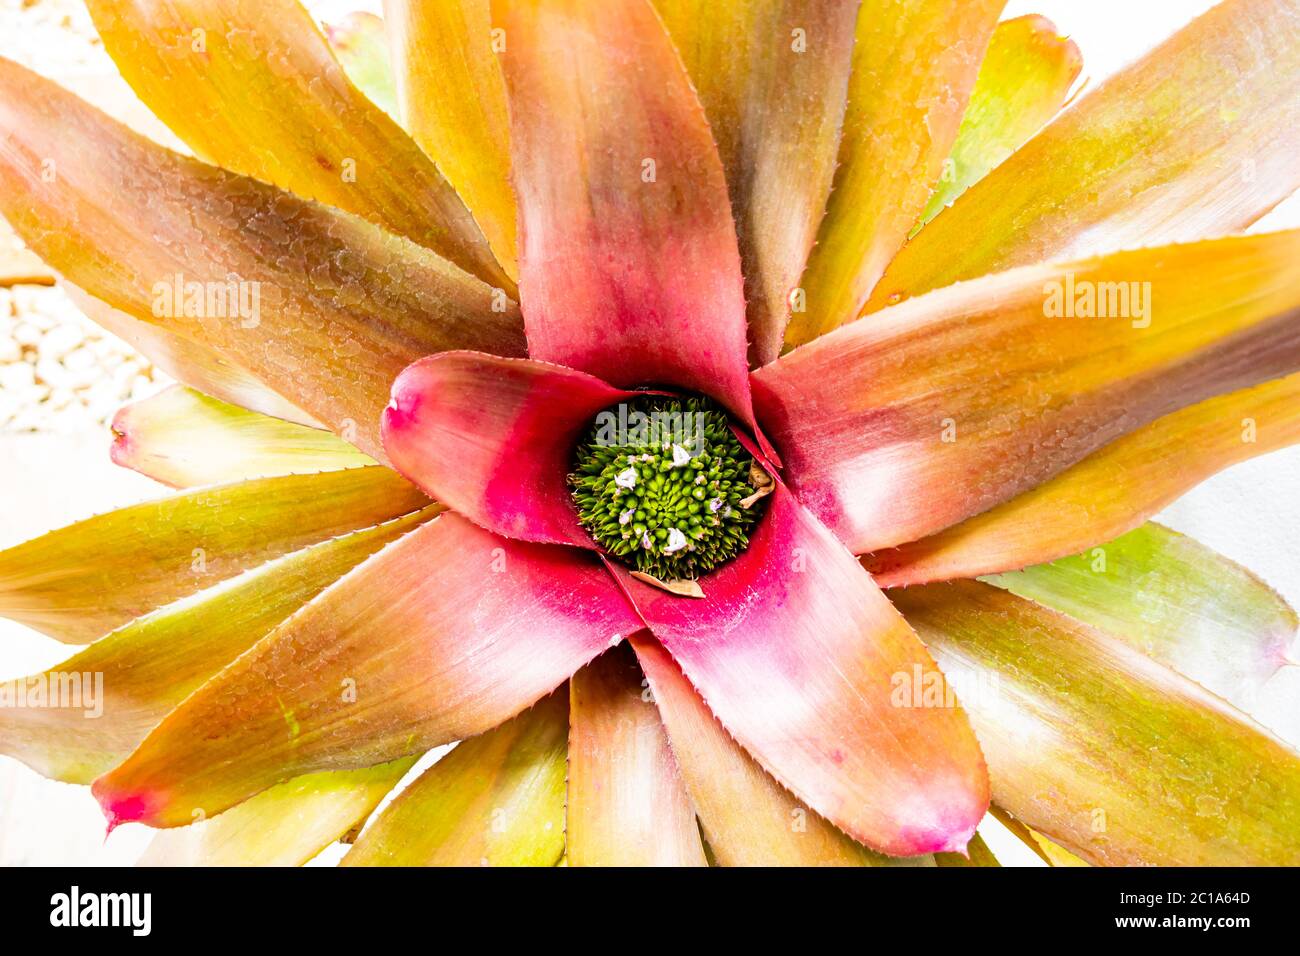 Top view of Bromeliad plant. Closeup view of bromeliad flower in a farm. Bromeliad is a tropical plant. Stock Photo